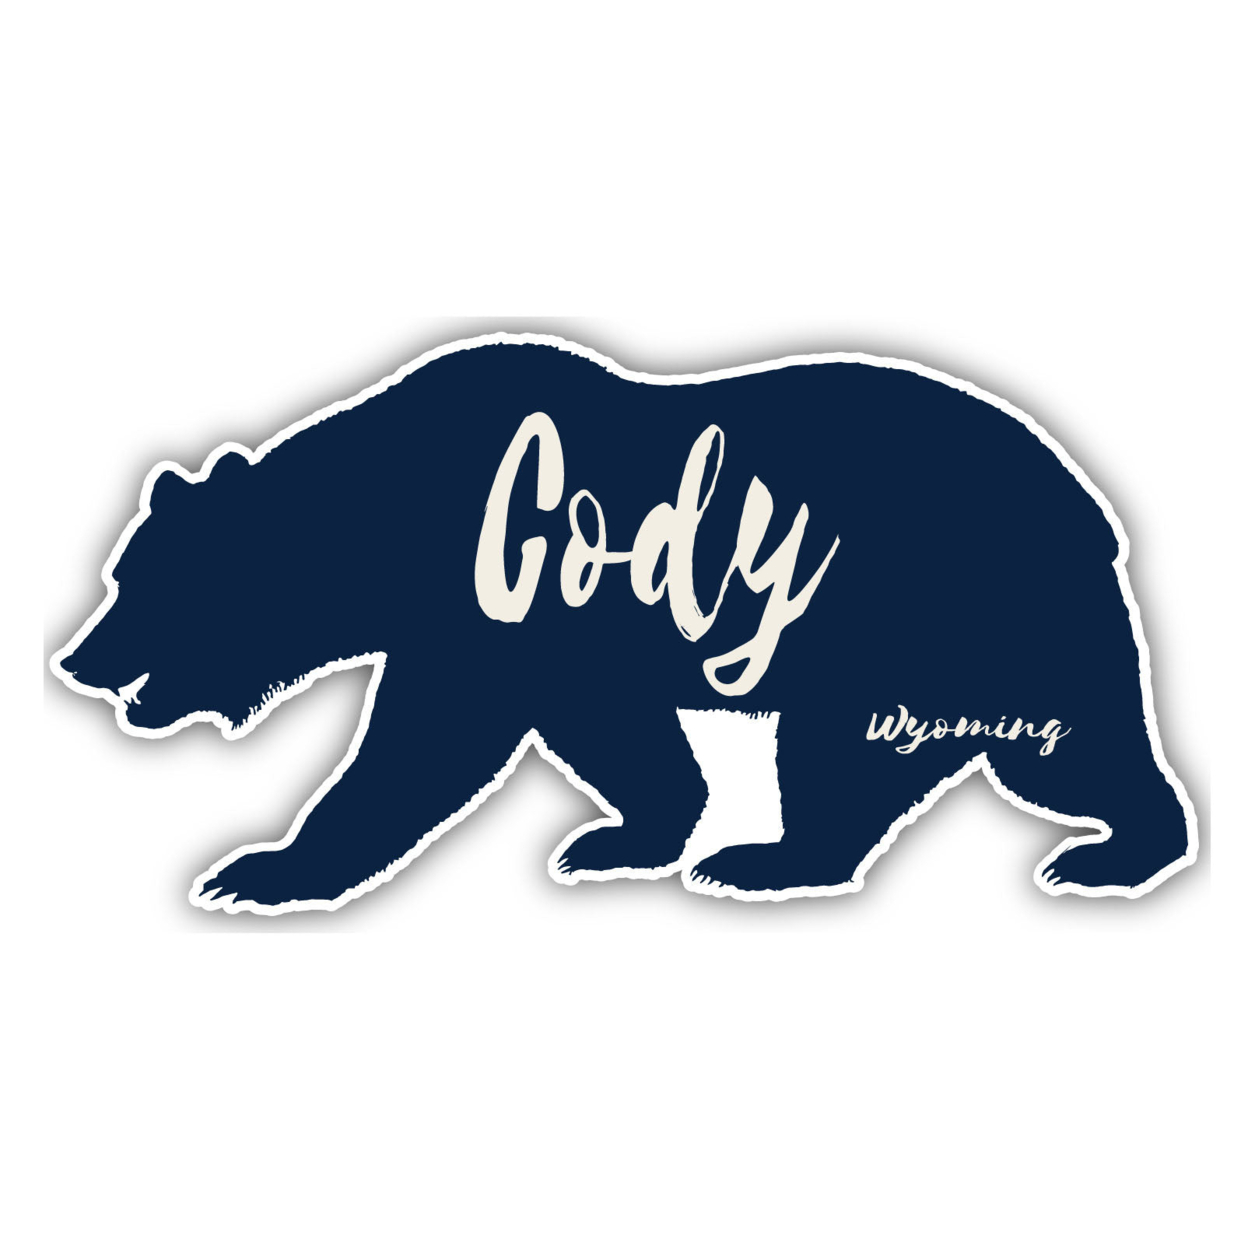 Cody Wyoming Souvenir Decorative Stickers (Choose Theme And Size) - Single Unit, 2-Inch, Bear